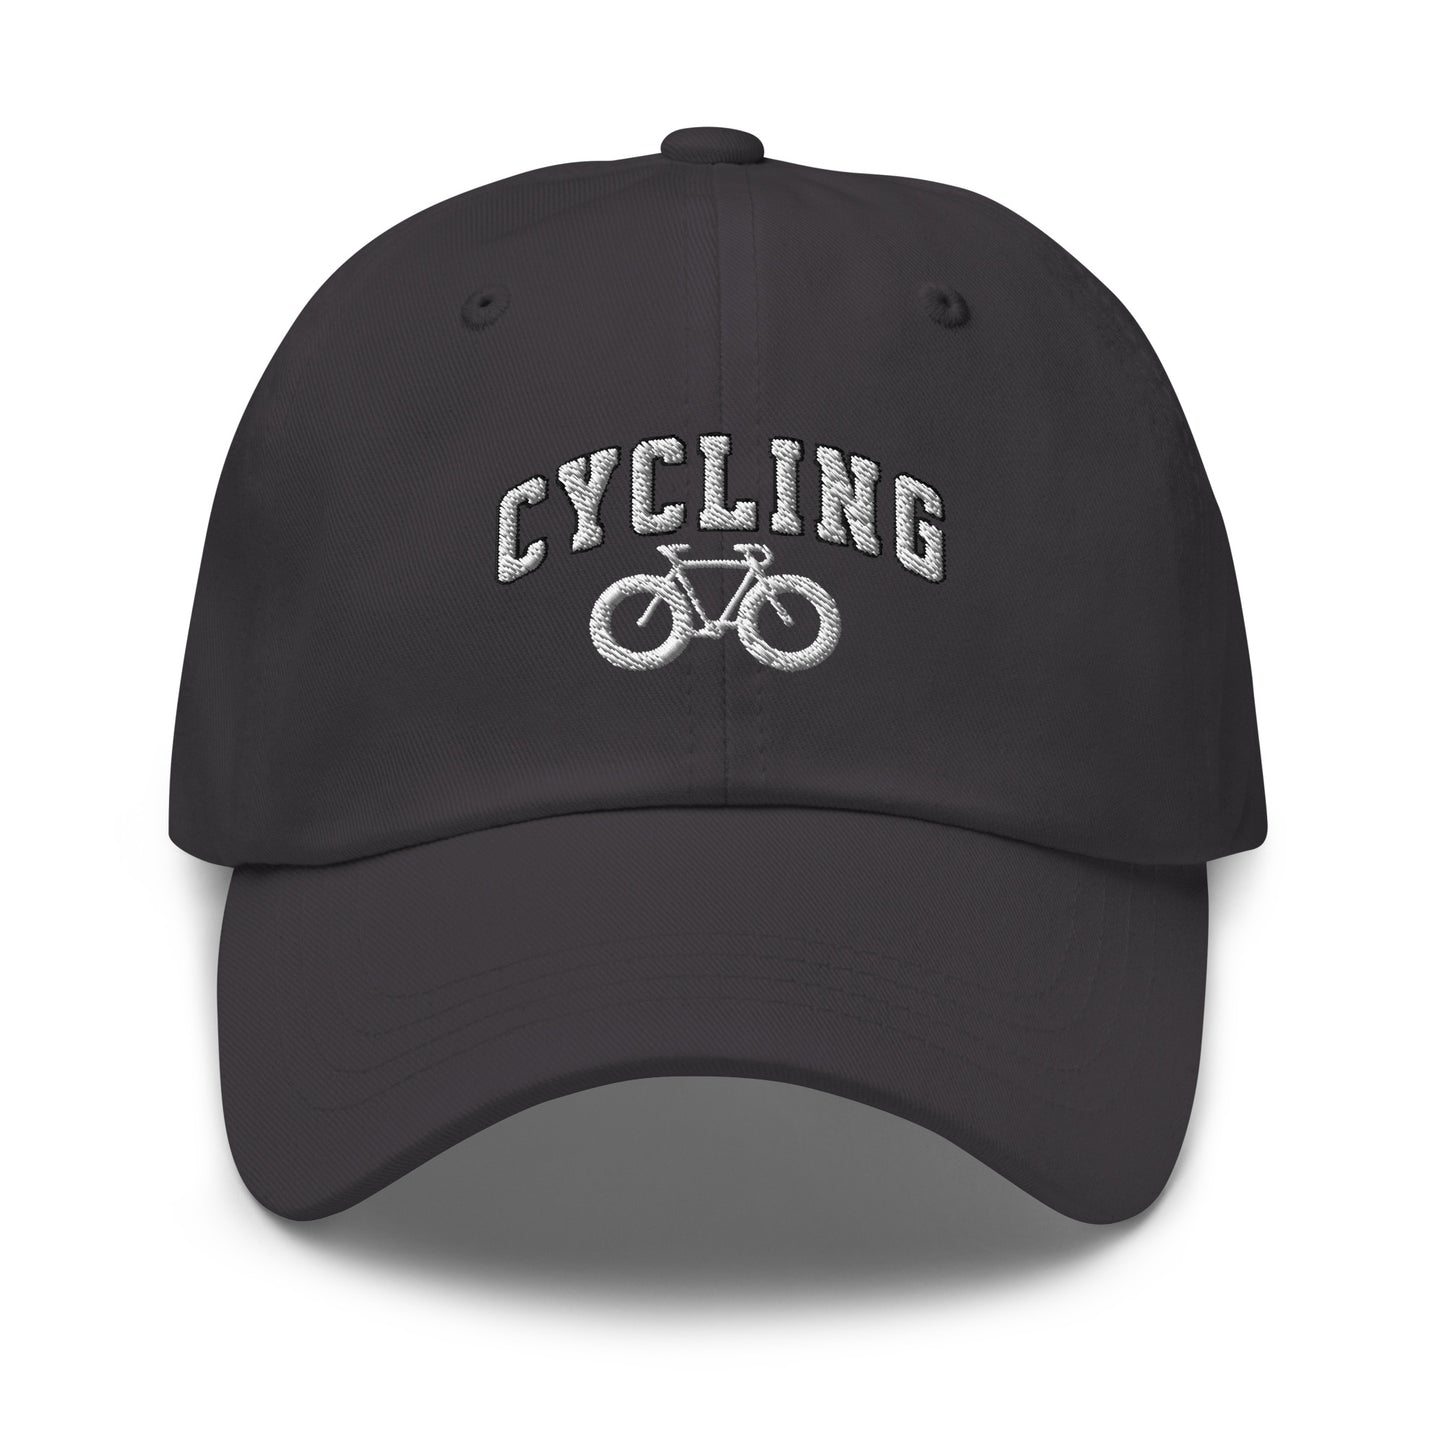 Bike and Cycling Text Embroidered Hat